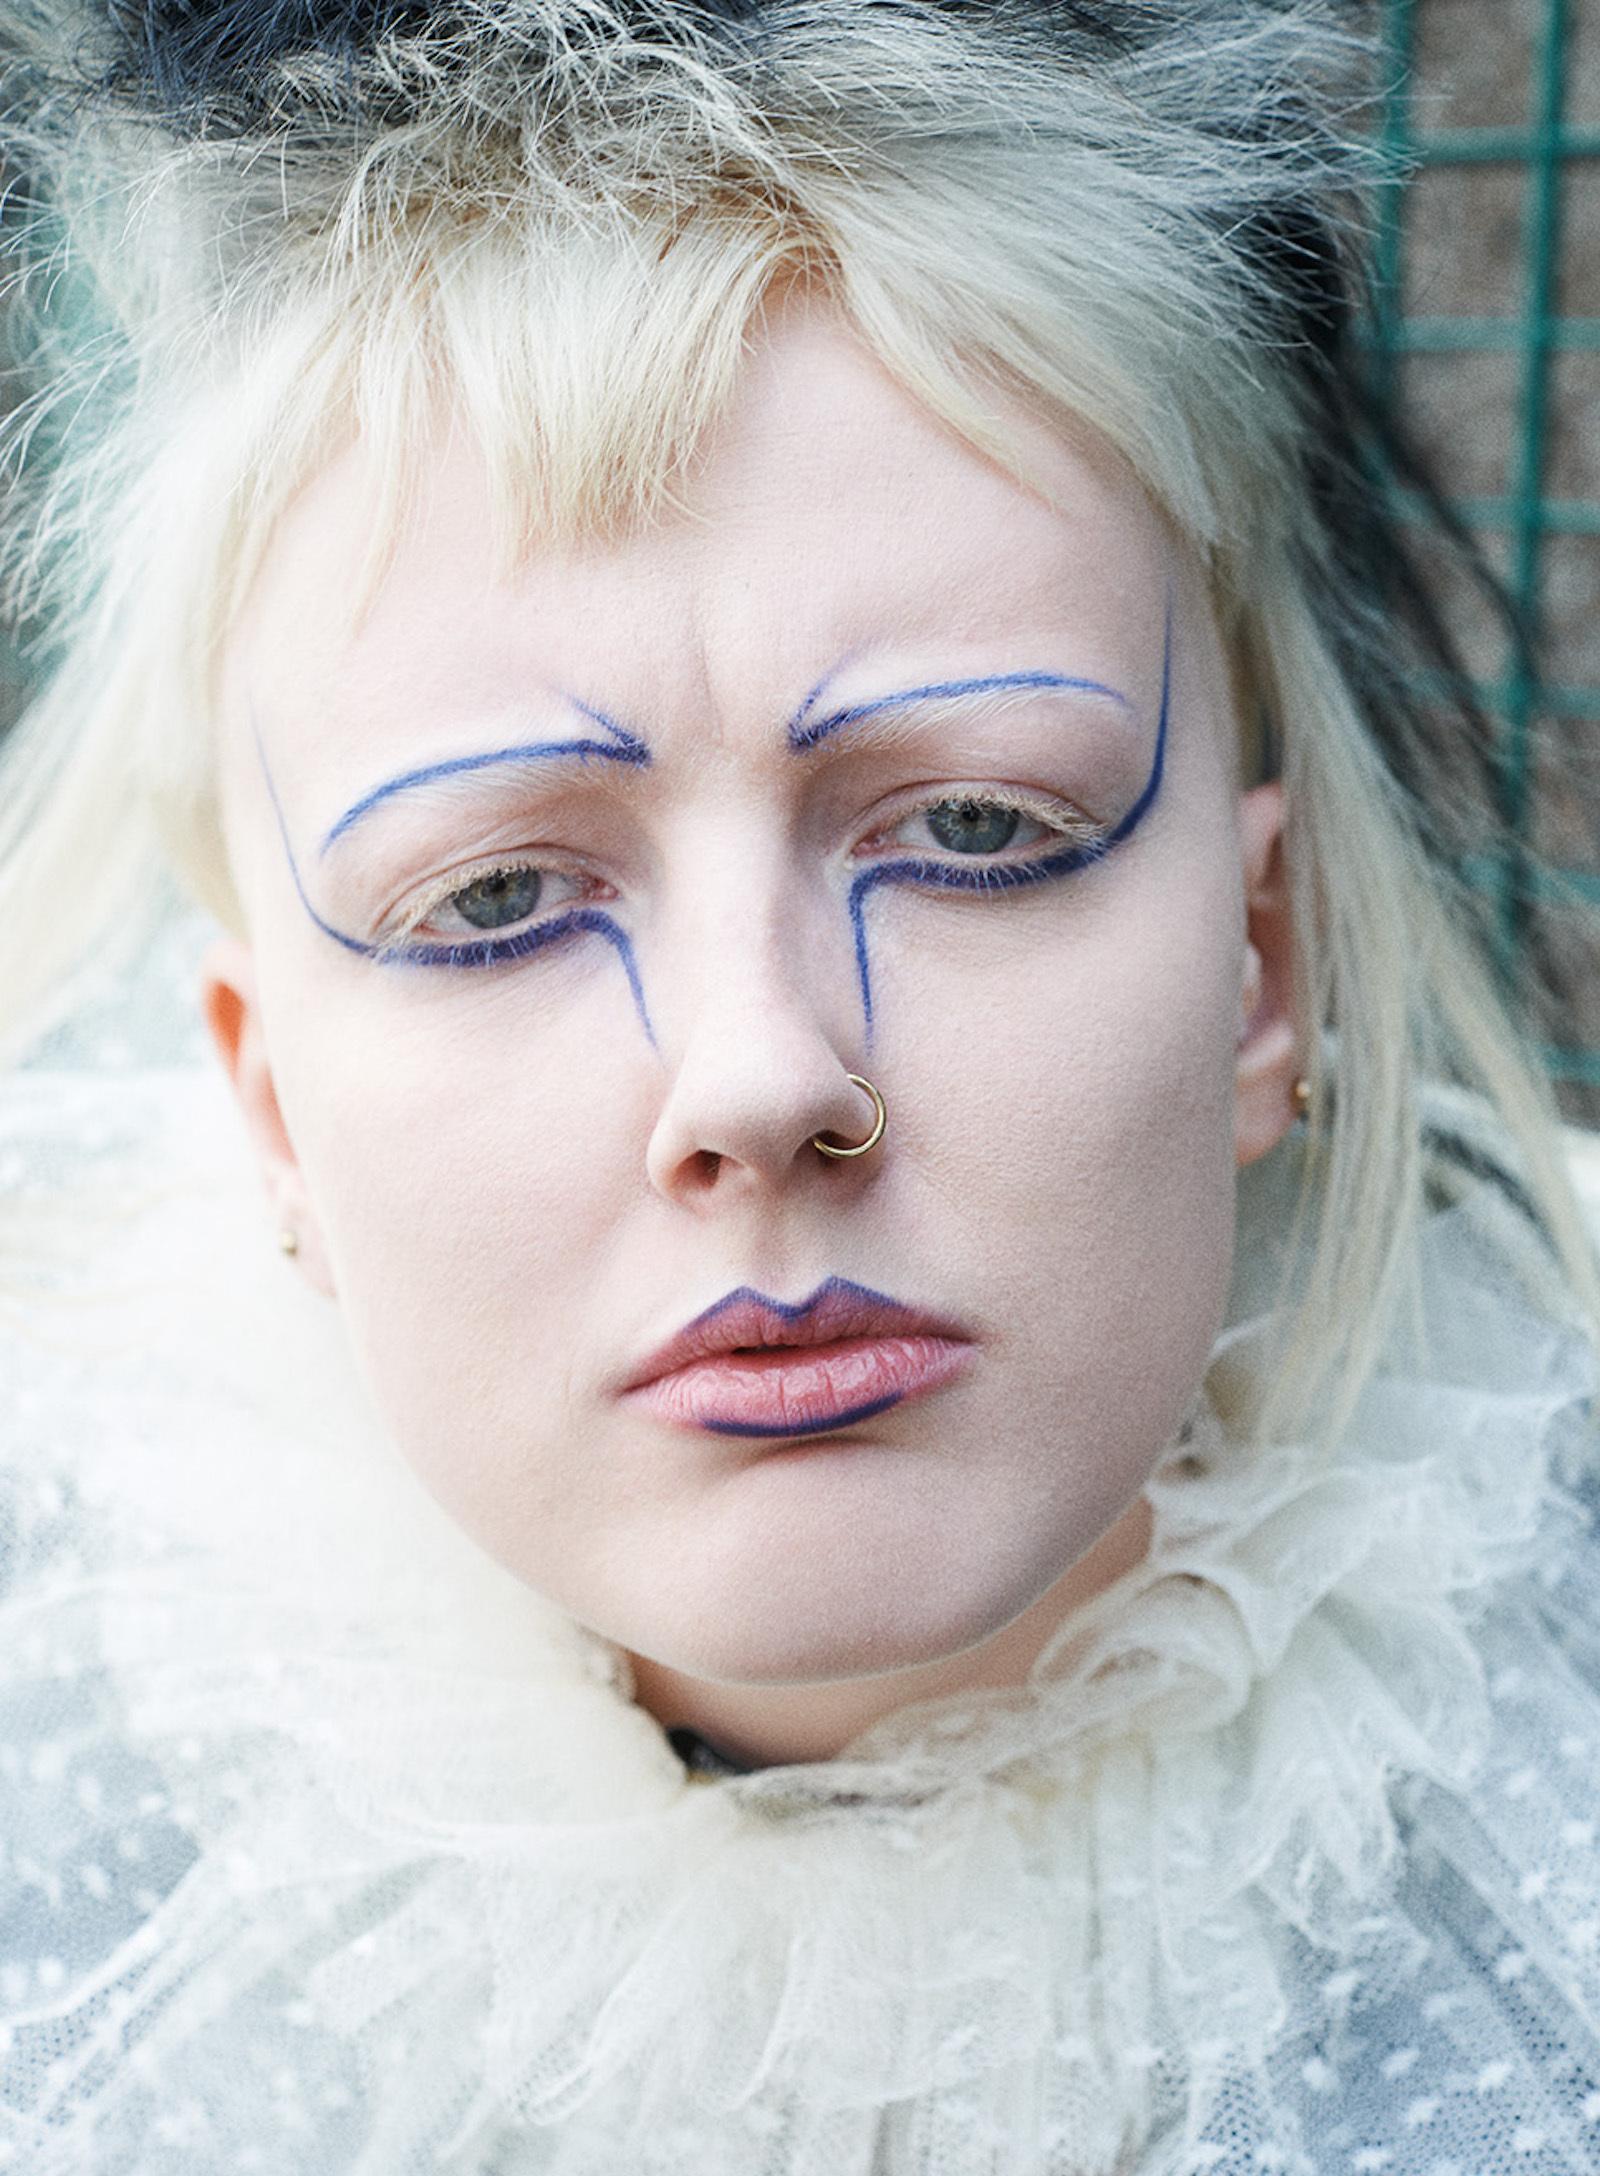 beauty papers magazine is a punk antidote to today’s beauty industry ...